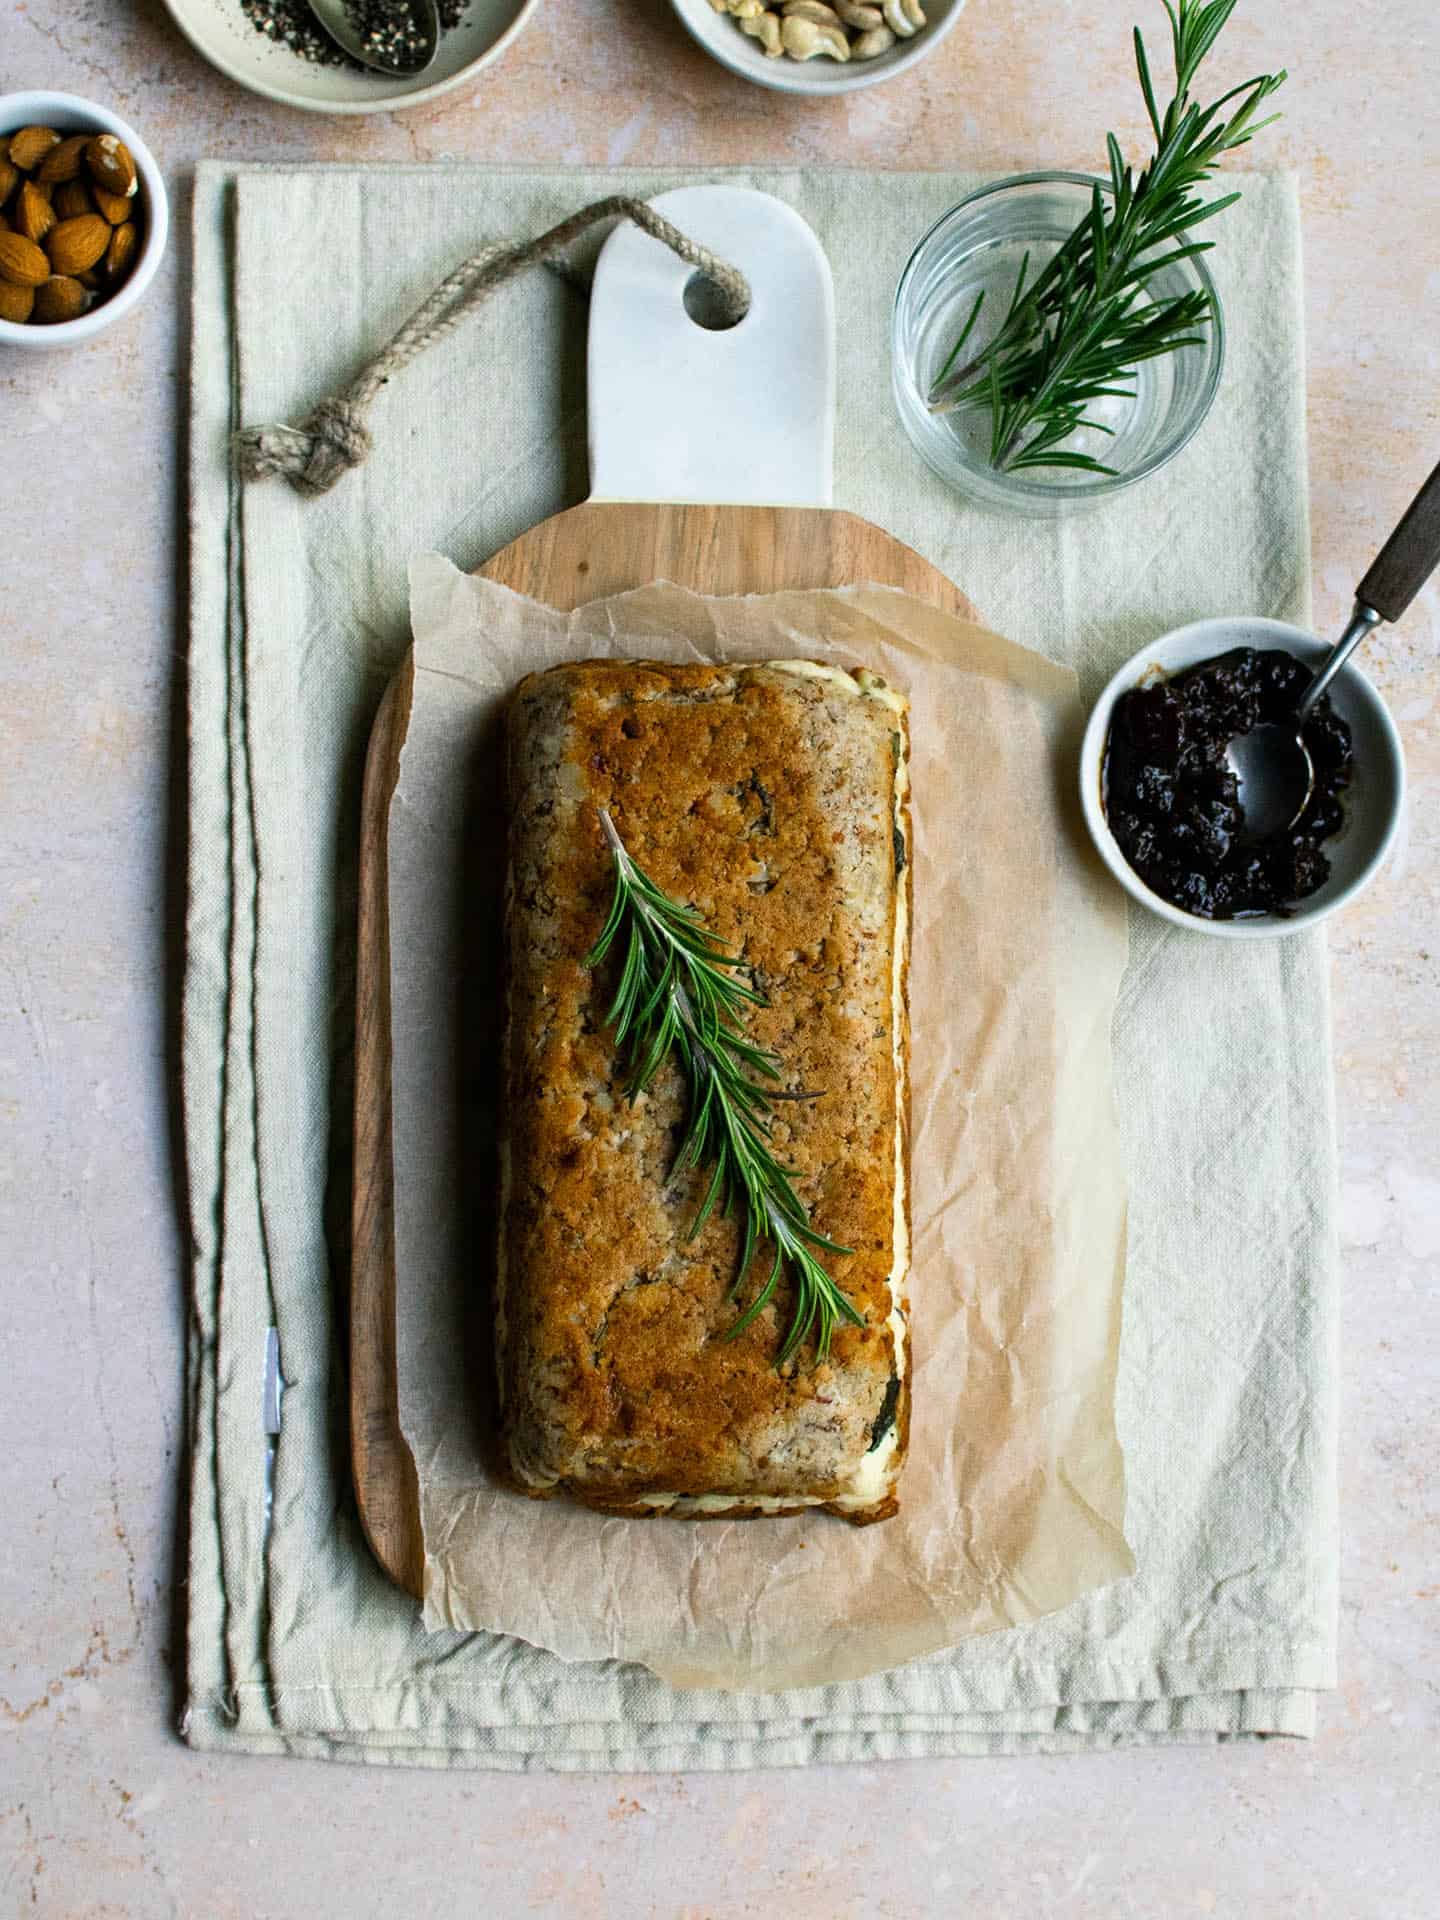 A top down photo of the cashew nut roast, sitting on top of a chopping board, which is on top of a stone coloured tea towel. There are a few pots on show round the board, one has rosemary in, another has a chutney or sauce in it. The cashew roast is a golden brown colour and is in a loaf shape.